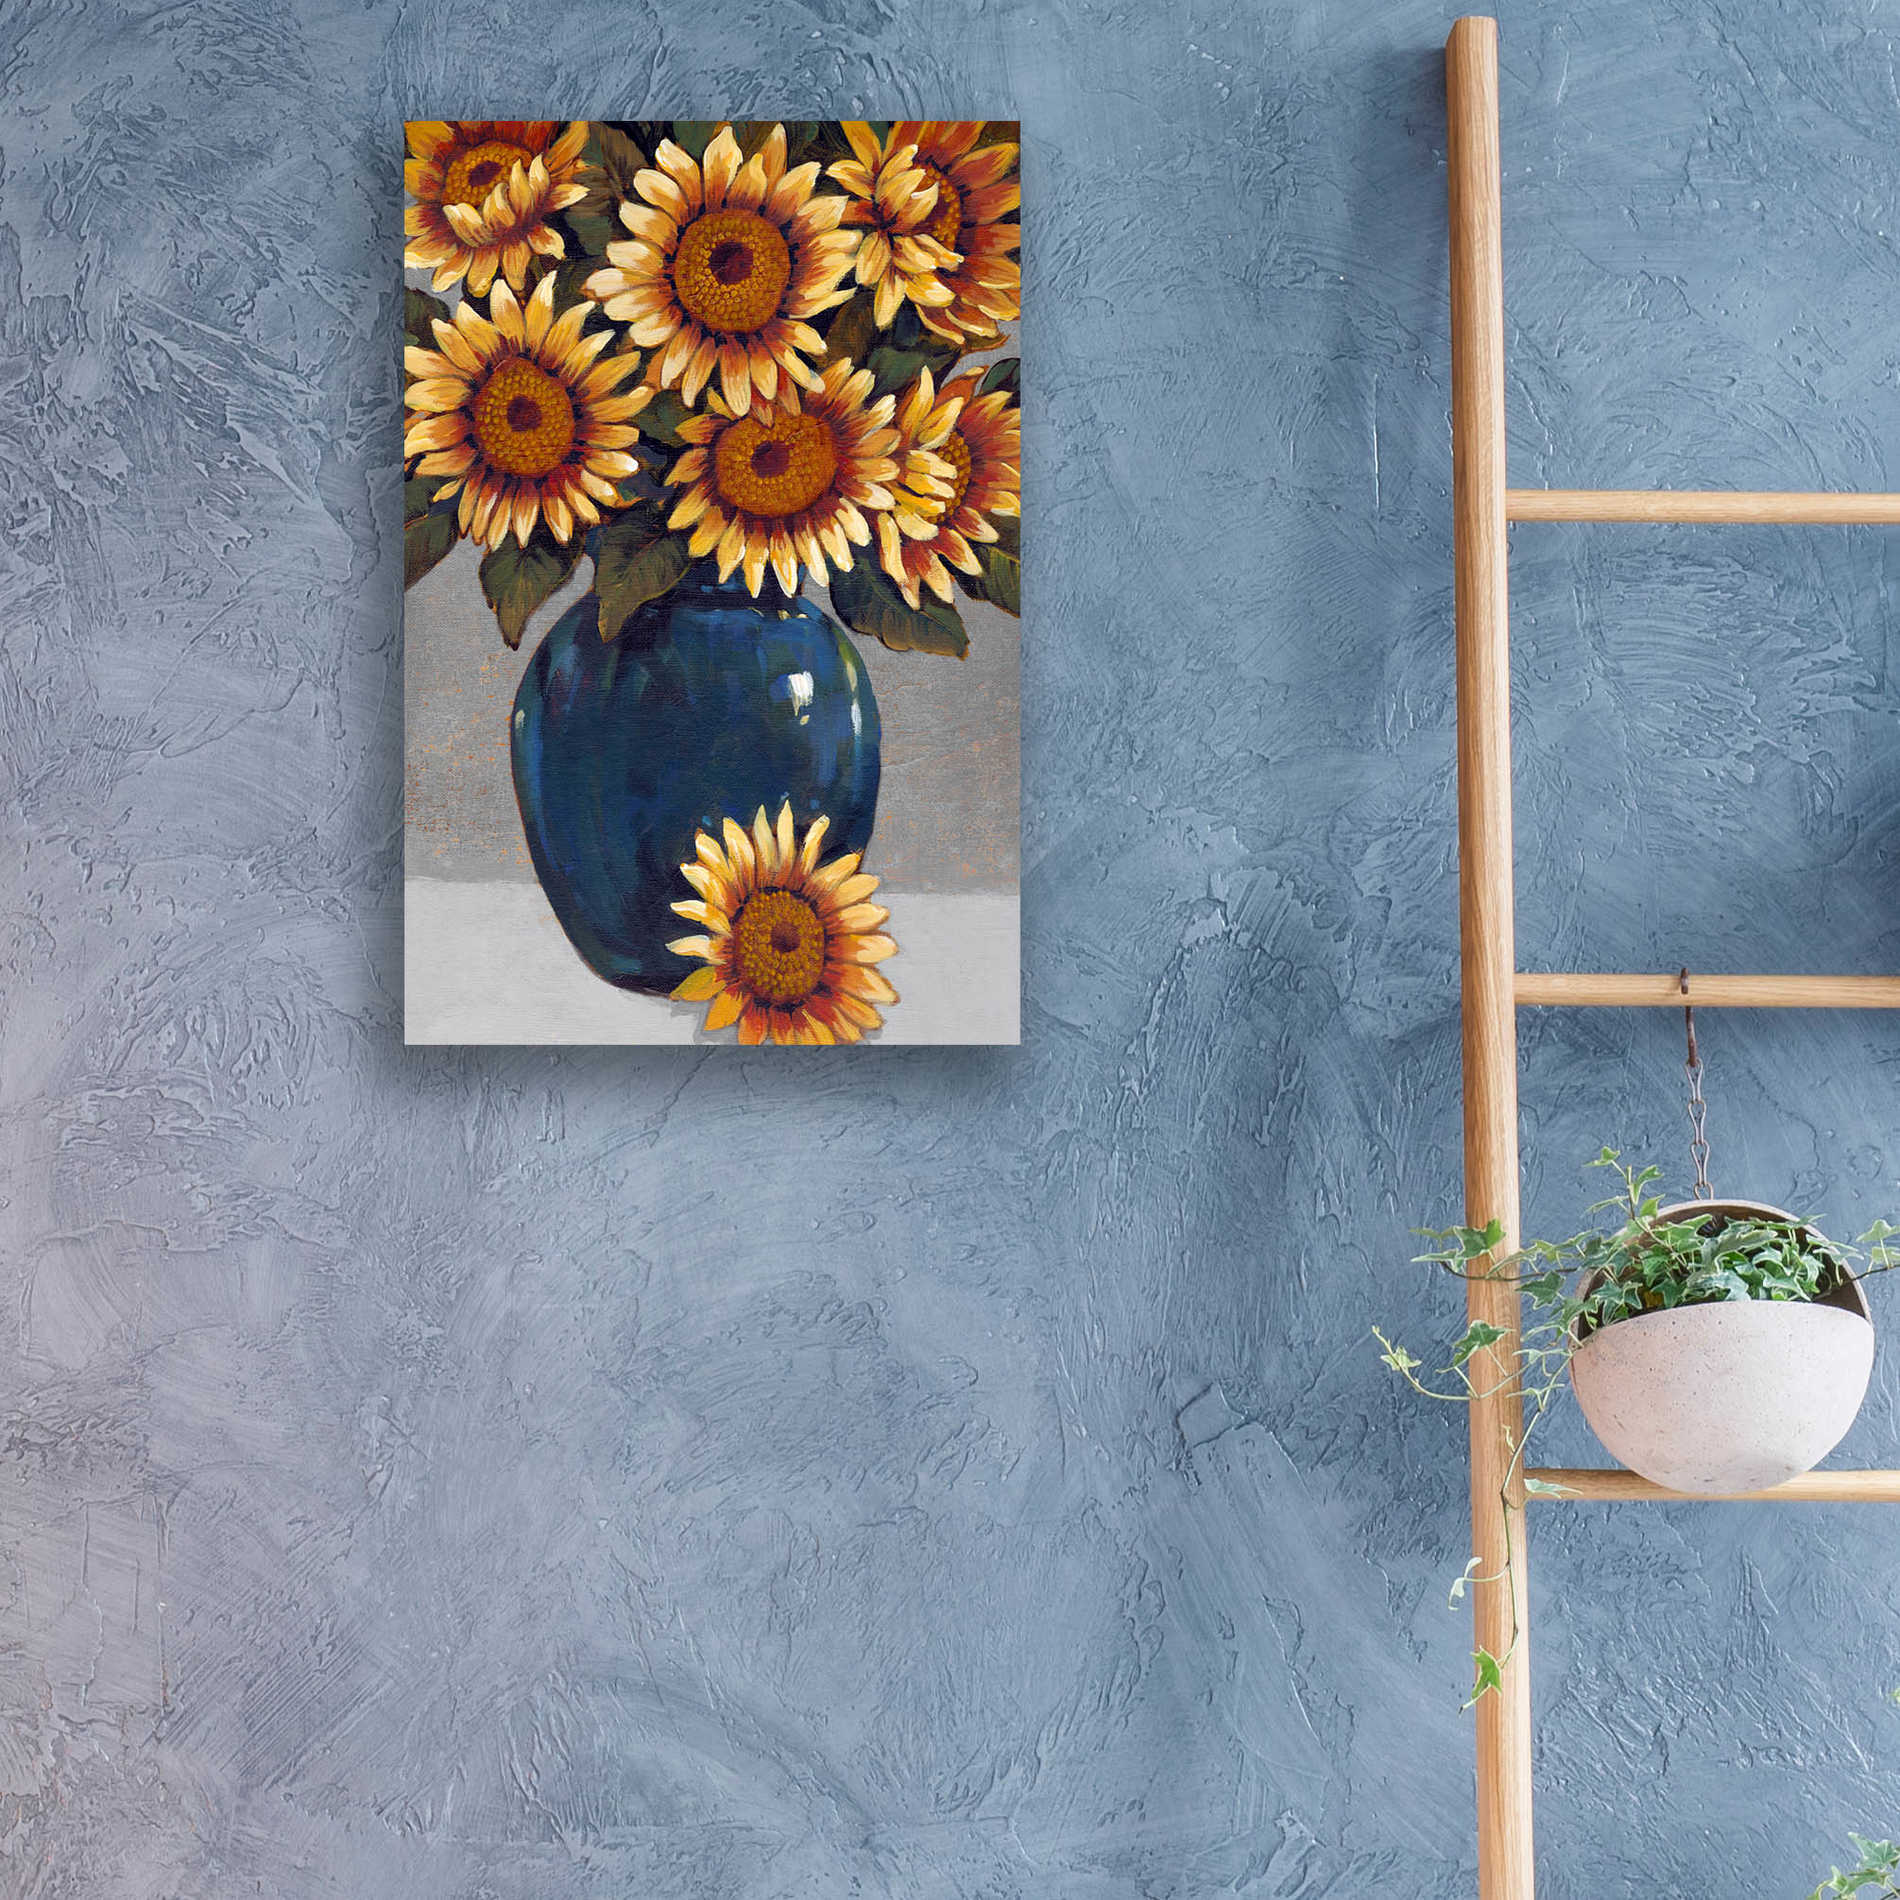 Epic Art 'Vase of Sunflowers I' by Tim O'Toole, Acrylic Glass Wall Art,16x24